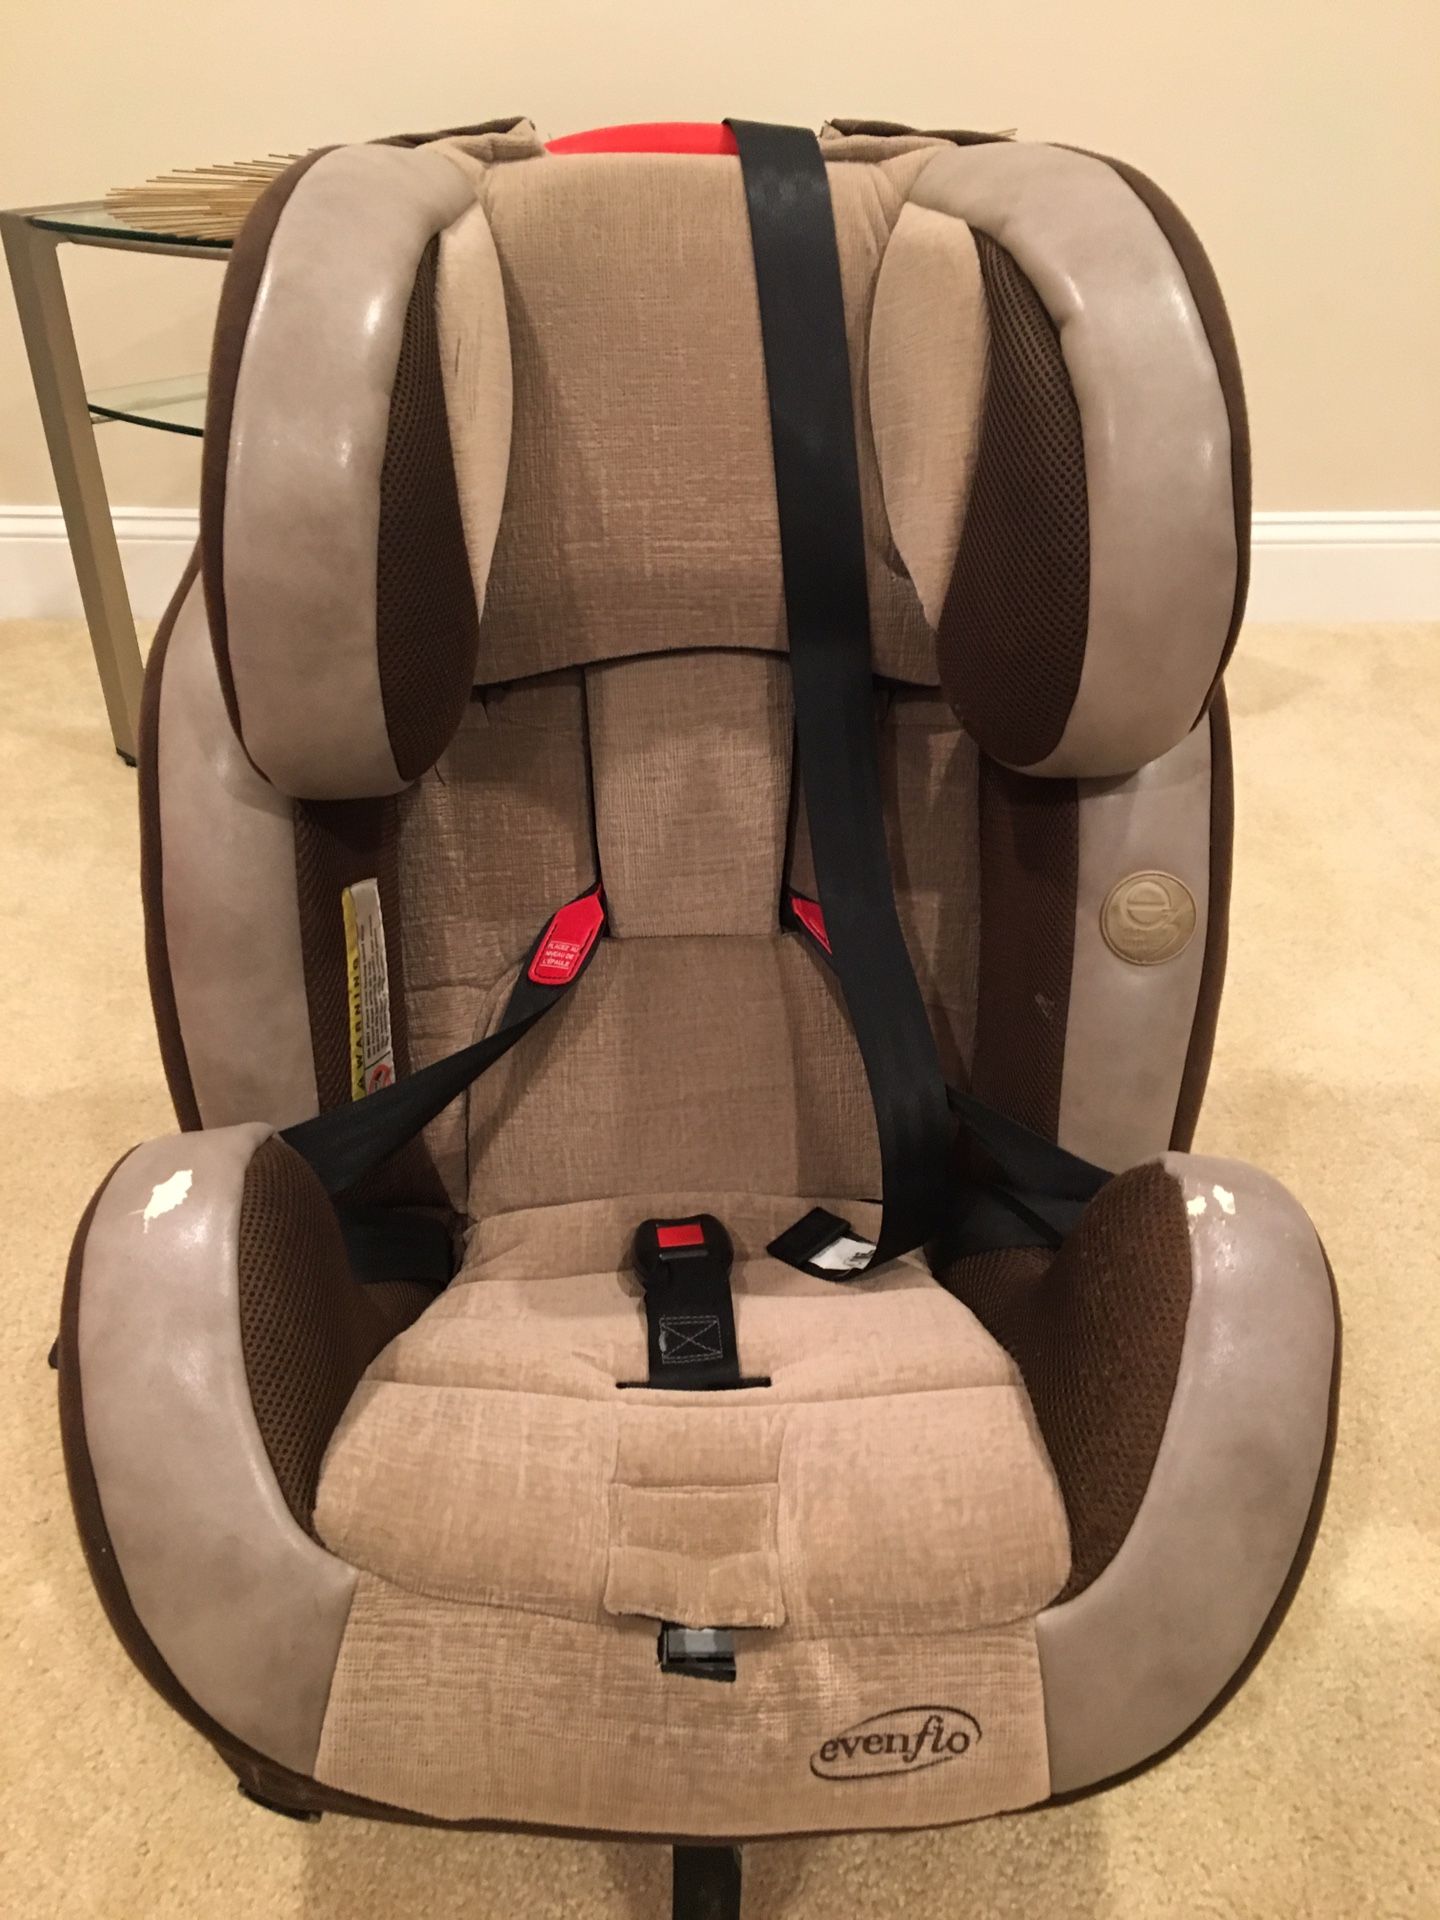 Graco Baby travel system - car seat and stroller frame